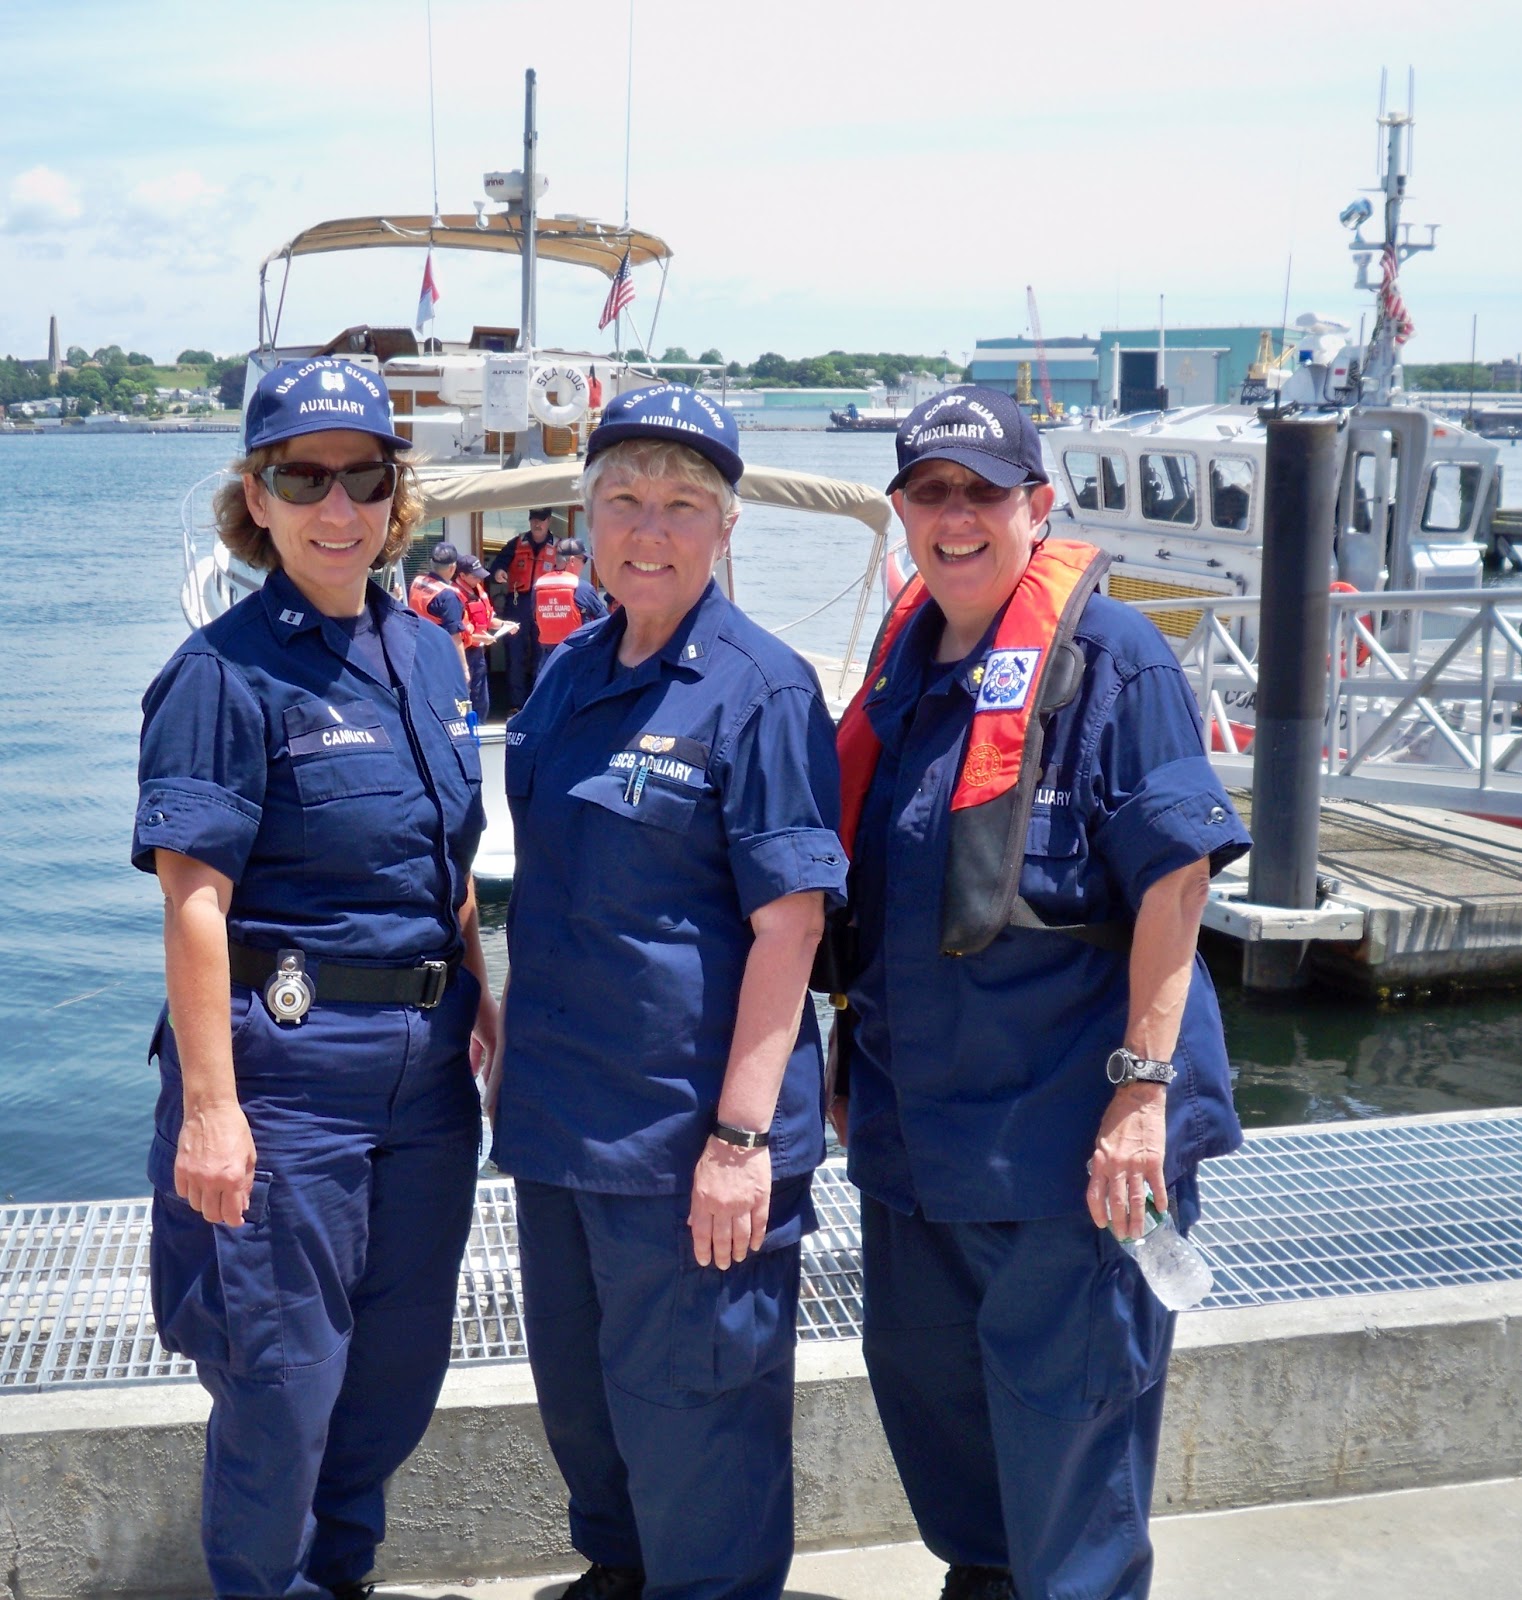 DSAR Team members (from left to right) Lorraine Cannata, 053-06-07 